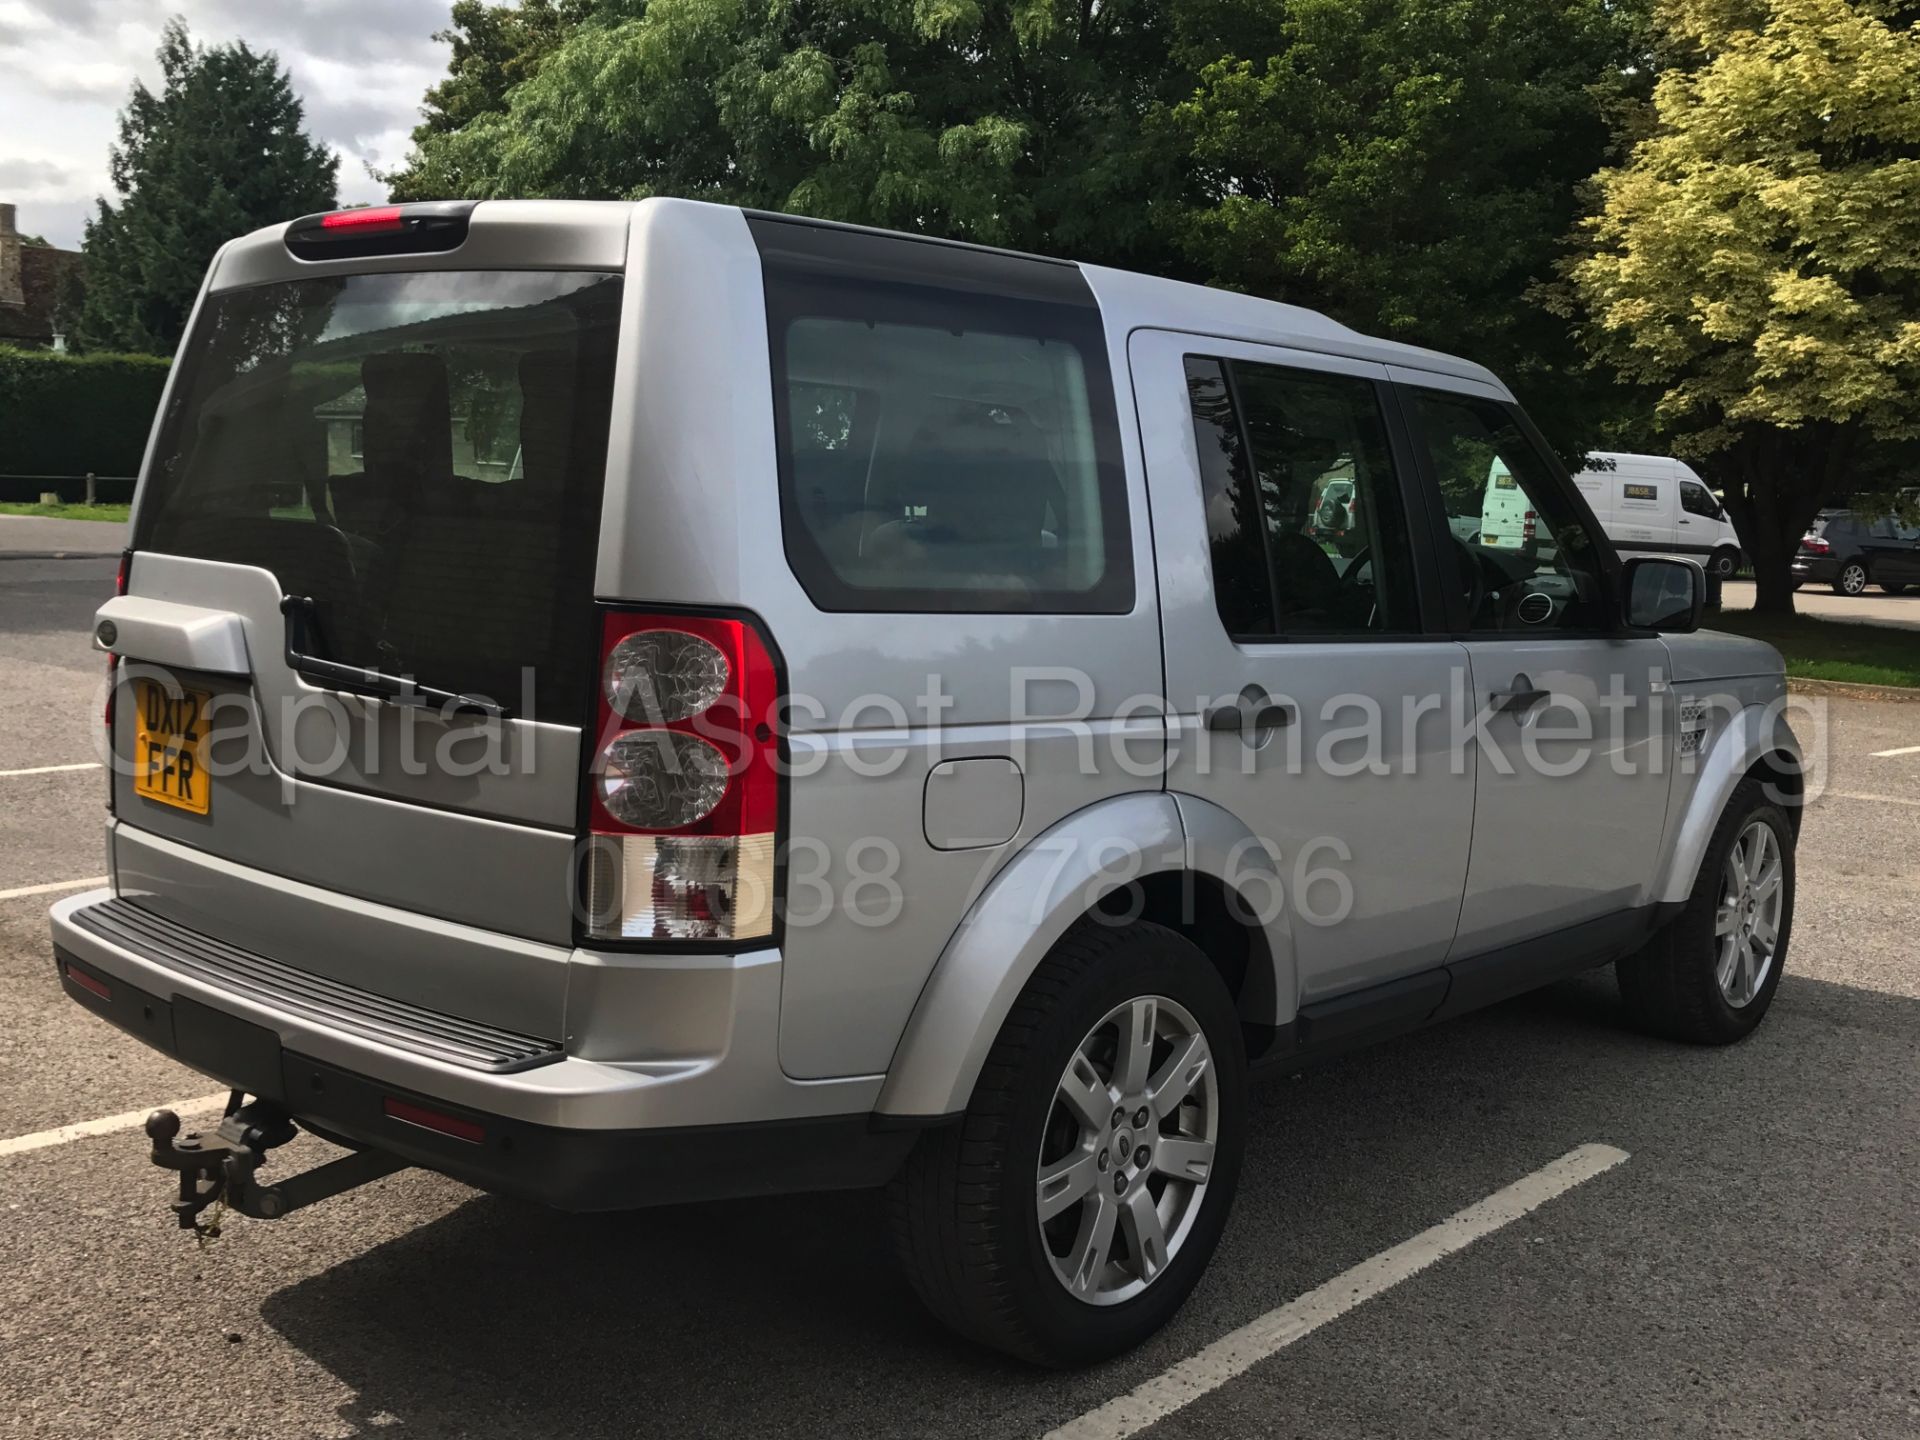 (On Sale) LAND ROVER DISCOVERY 4 (2012) '3.0 SDV6 - 8 SPEED AUTO - 7 SEATER' **HUGE SPEC** (1 OWNER) - Image 9 of 33